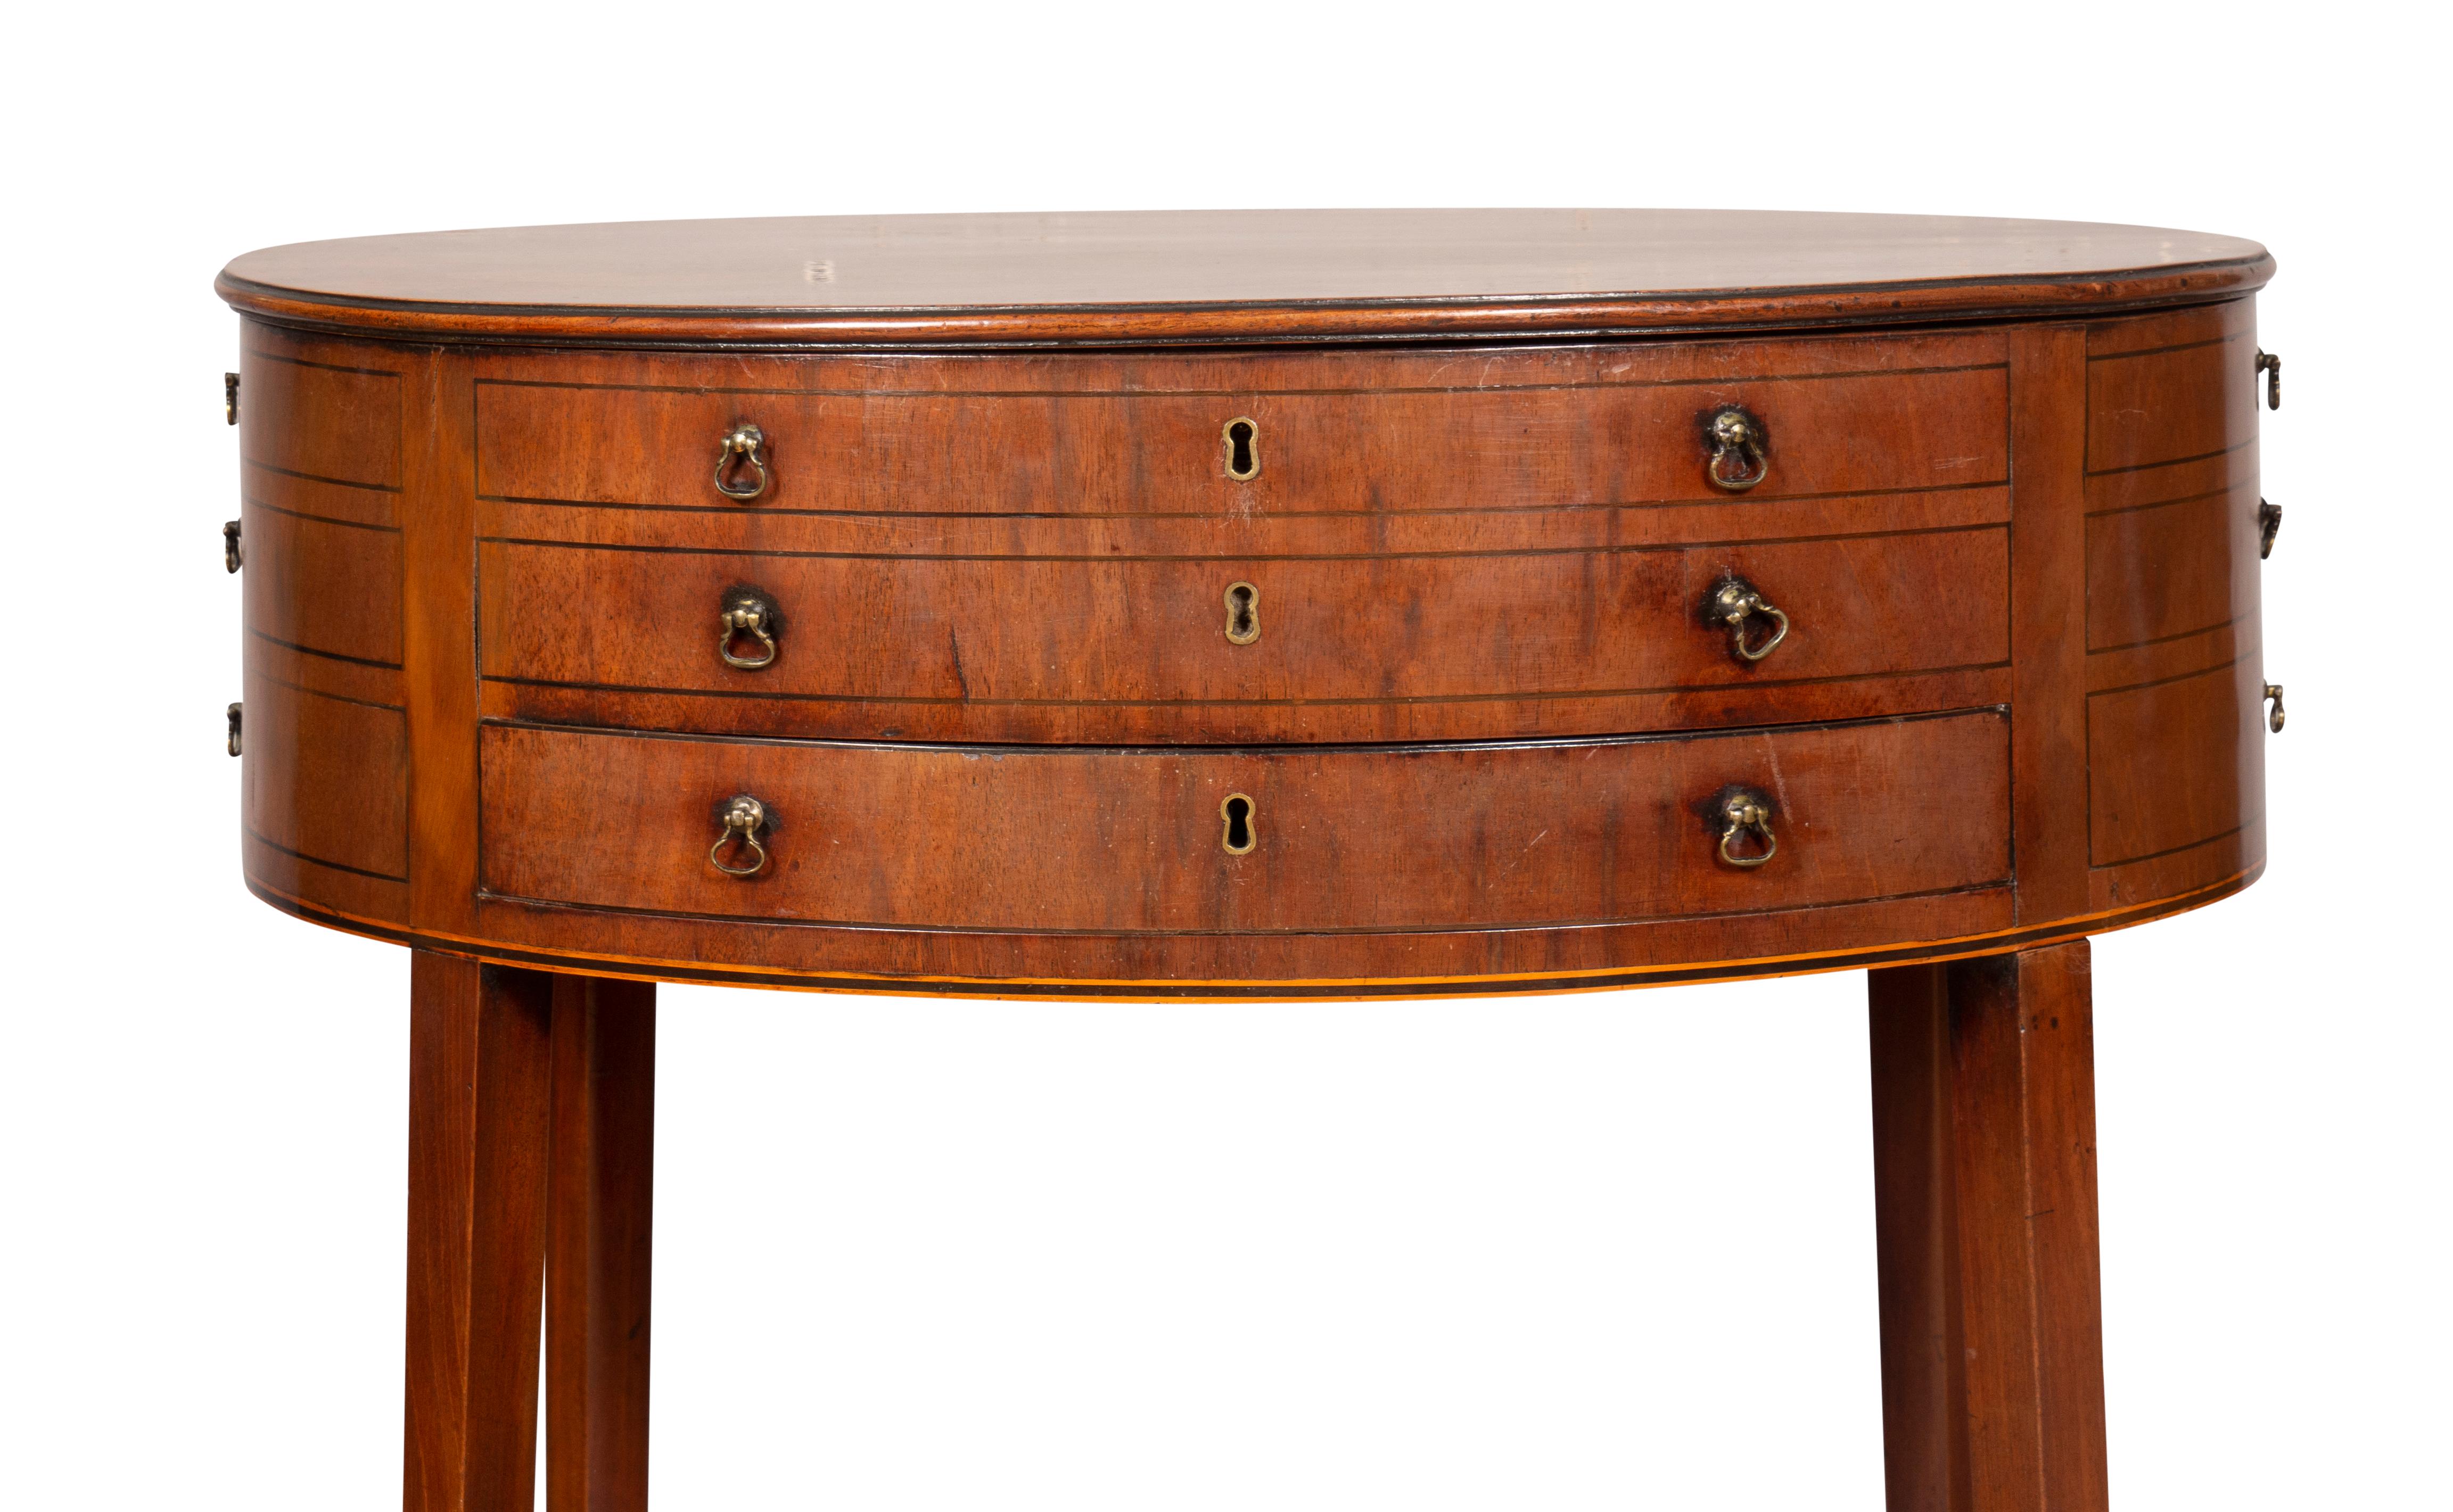 Oval hinged top and open interior over a conforming case with faux drawers and working drawer.
Square splayed legs and X form stretcher. With key.